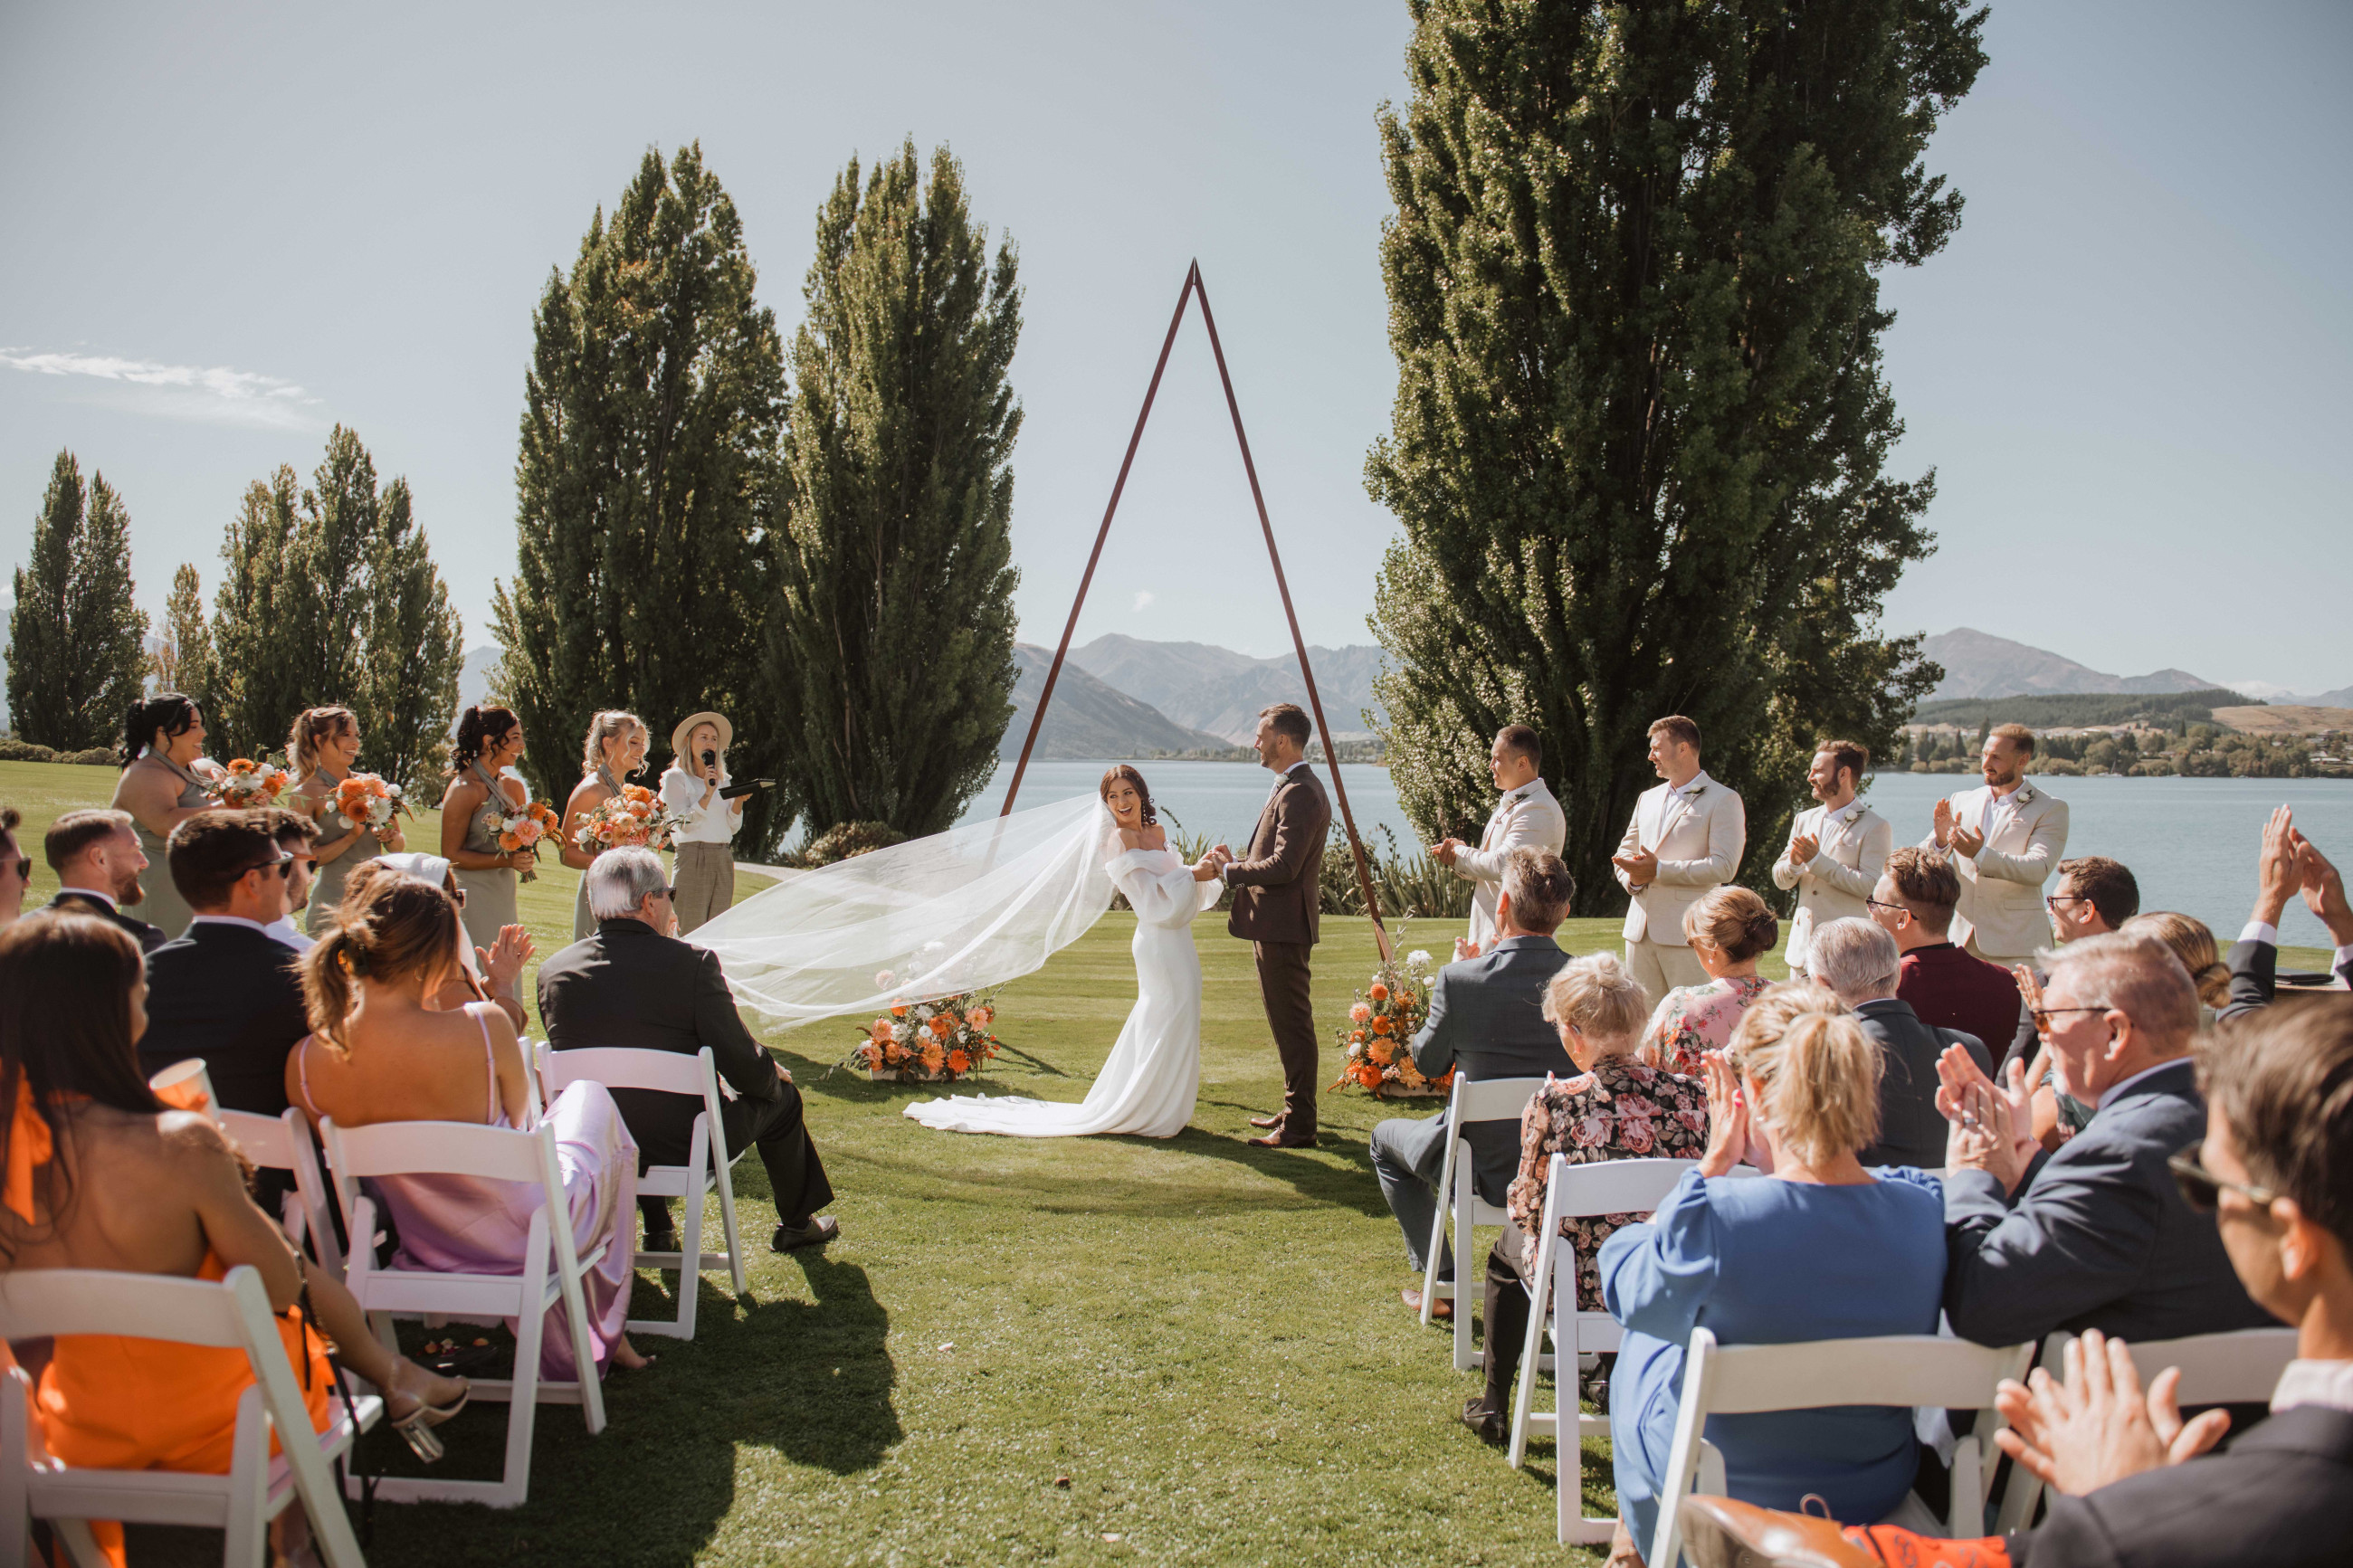 Edgewater makes for the ideal wedding venue!